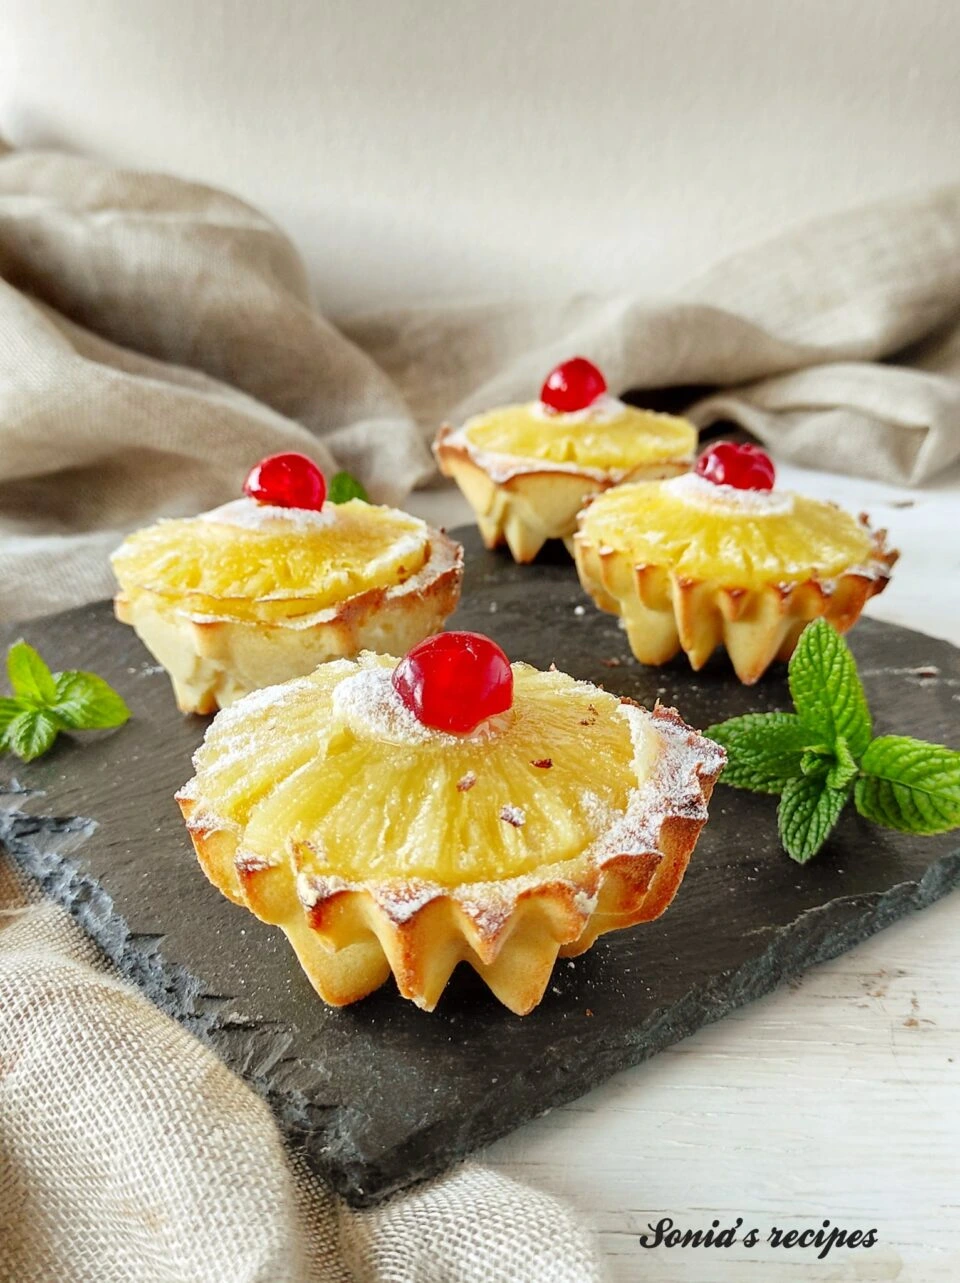 Mini Cake with pineapple and cherry on top